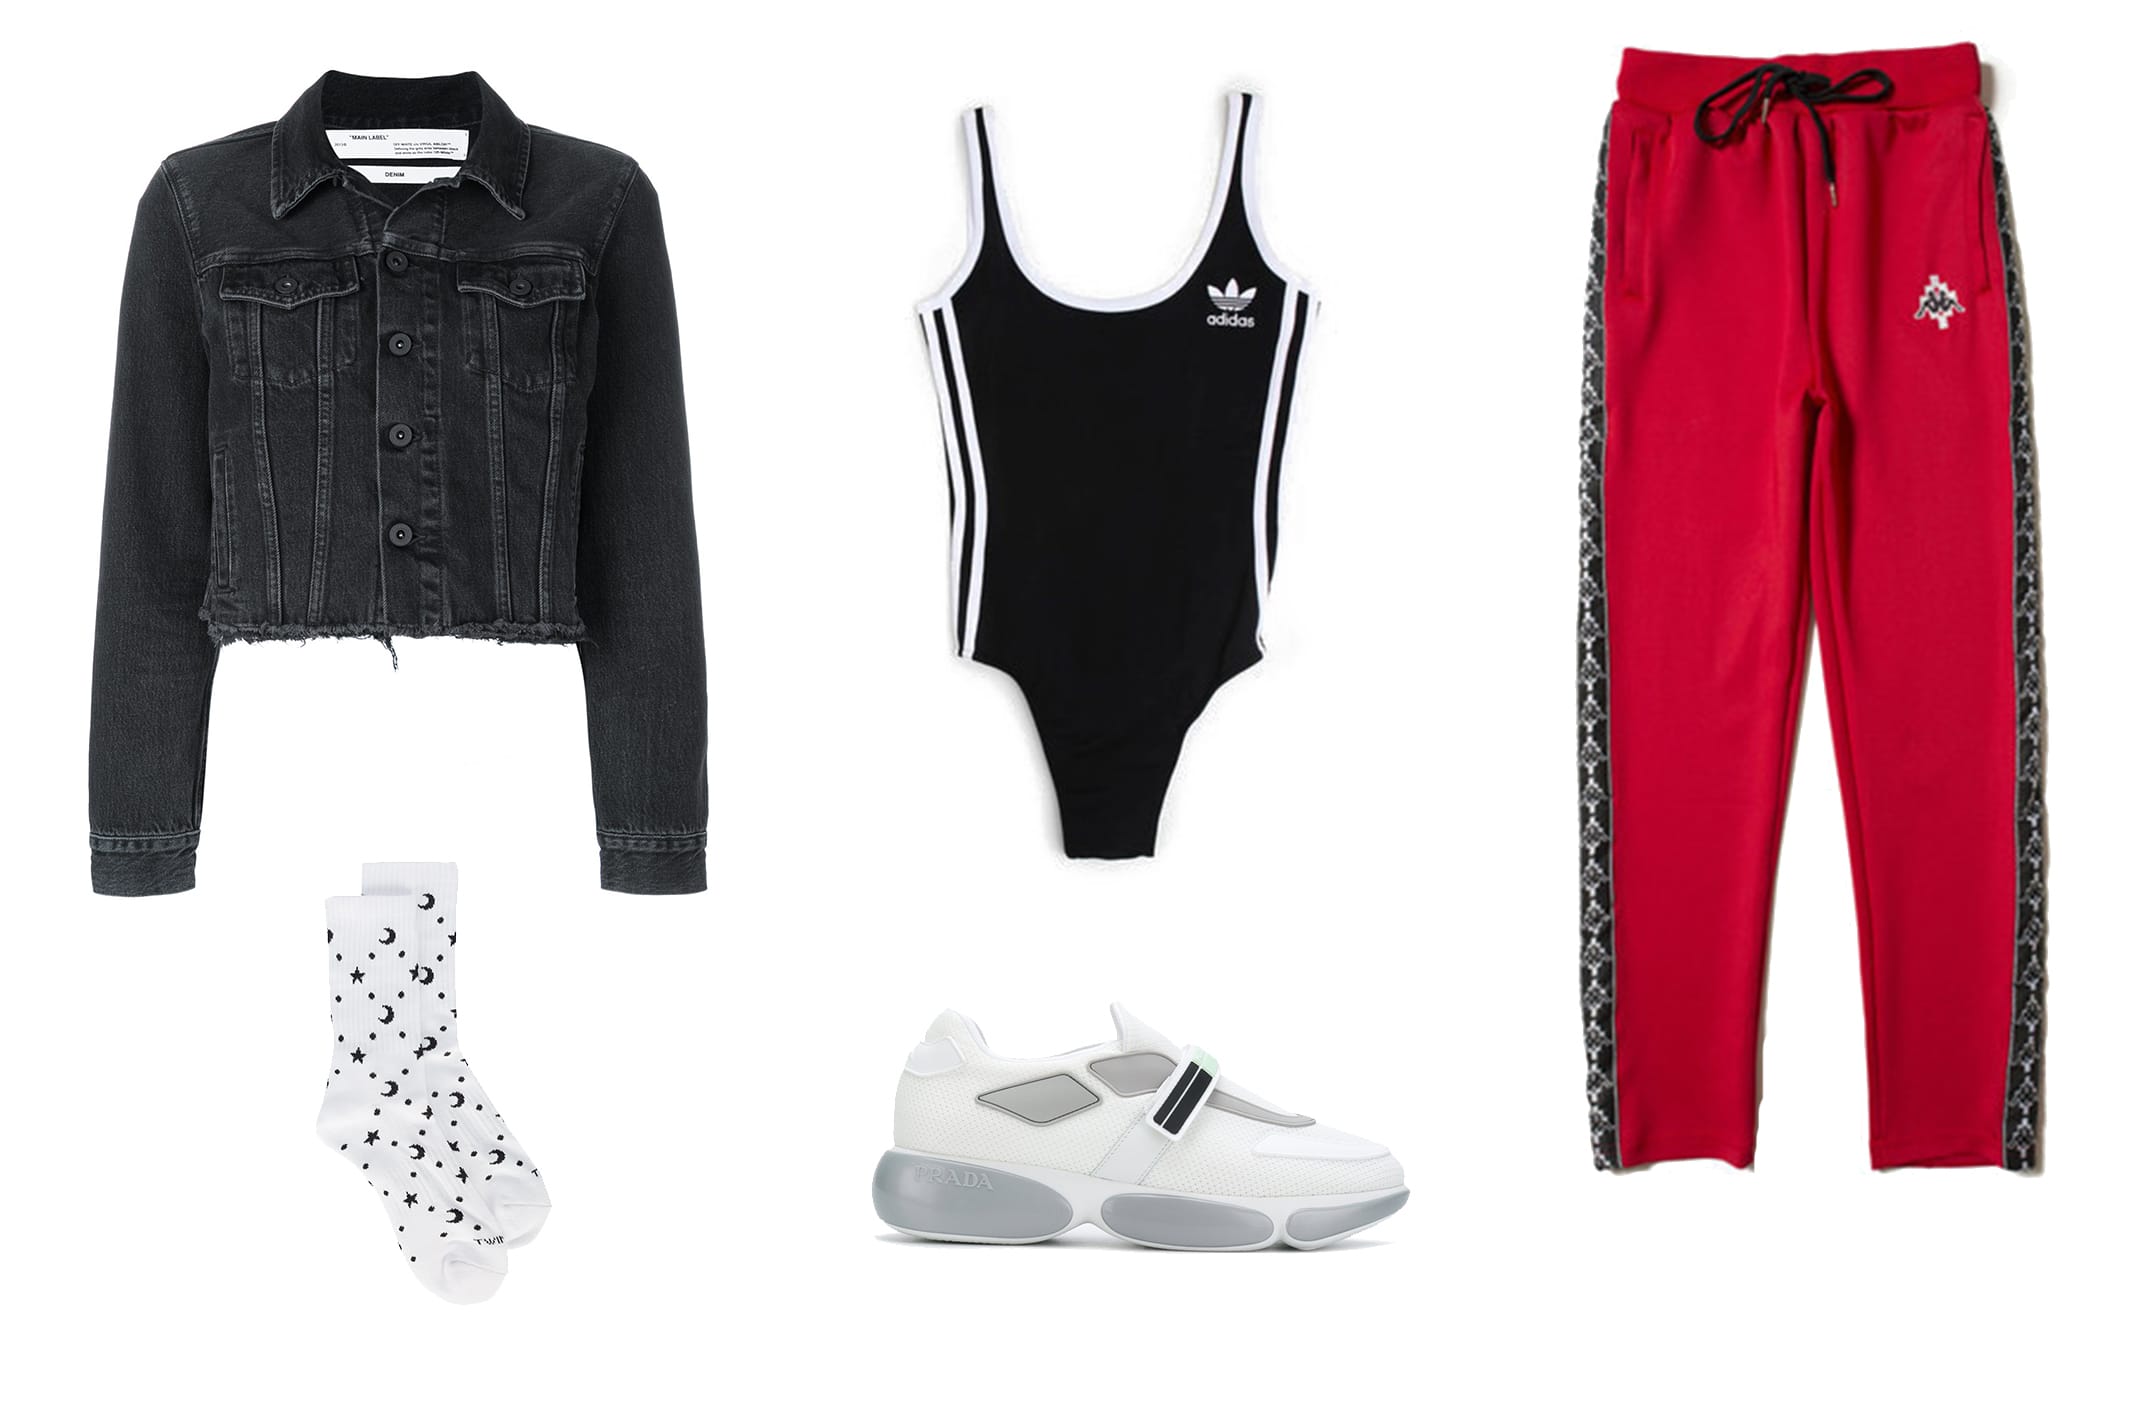 adidas bodysuit outfit